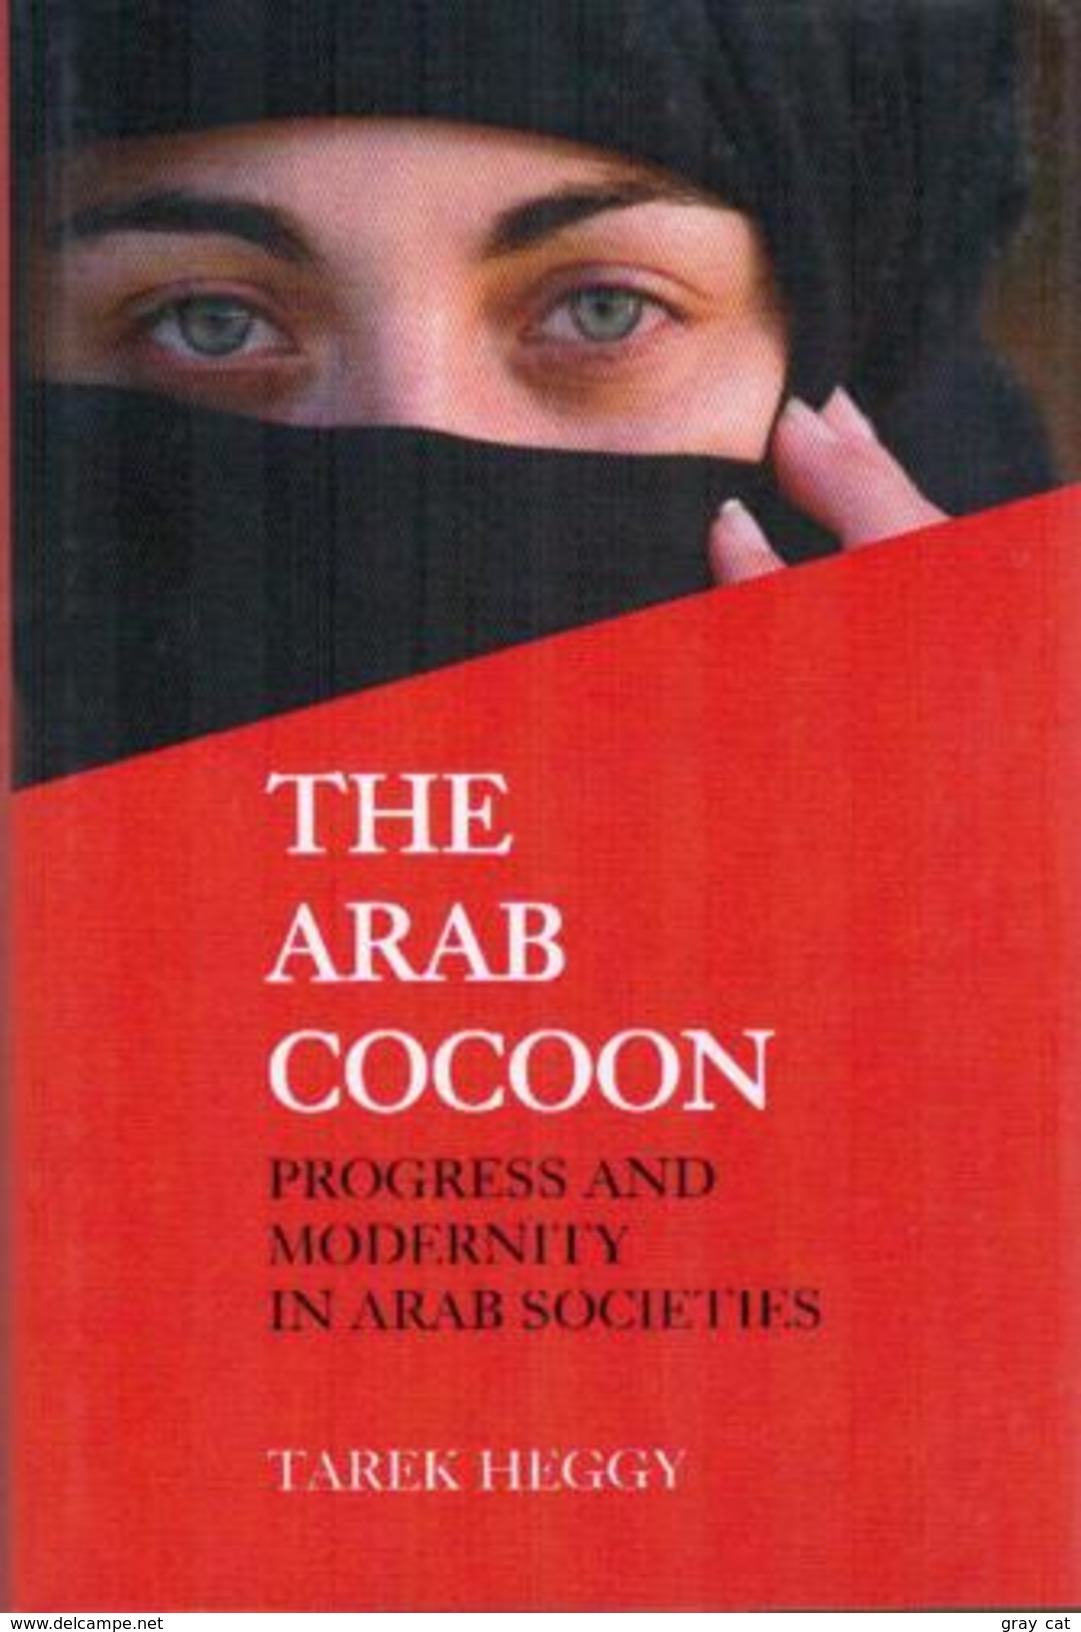 The Arab Cocoon: Progress And Modernity In The Arab Societies By Tarek Heggy (ISBN 9780853039228) - Middle East